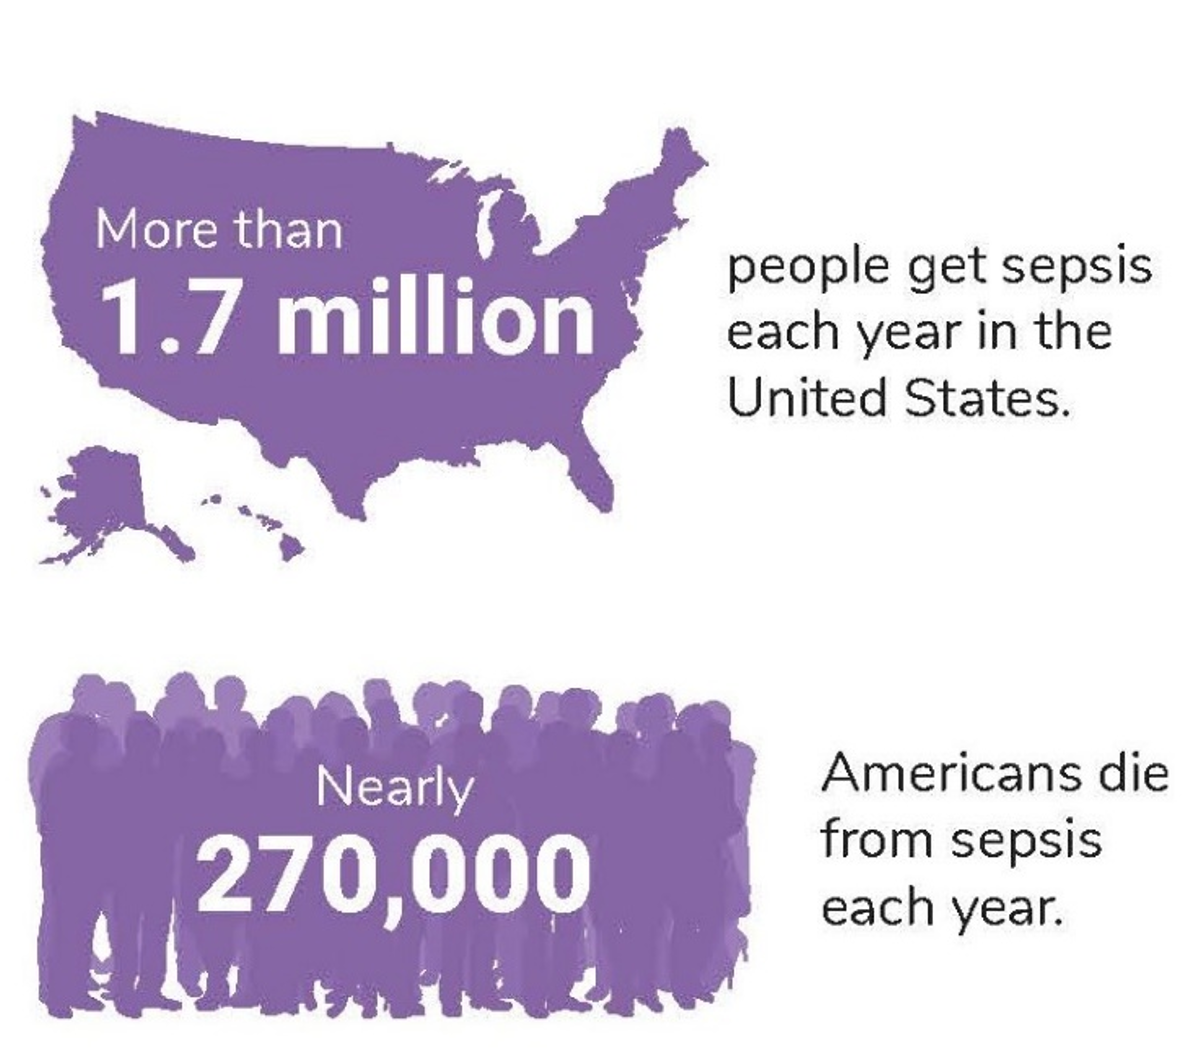 Top: Text over a silhouetted map of the United States that reads, More than 1.7 million people get sepsis each year in the United States. Bottom: Text over a background silhouette of people that reads, Nearly 270,000 Americans die from sepsis each year.